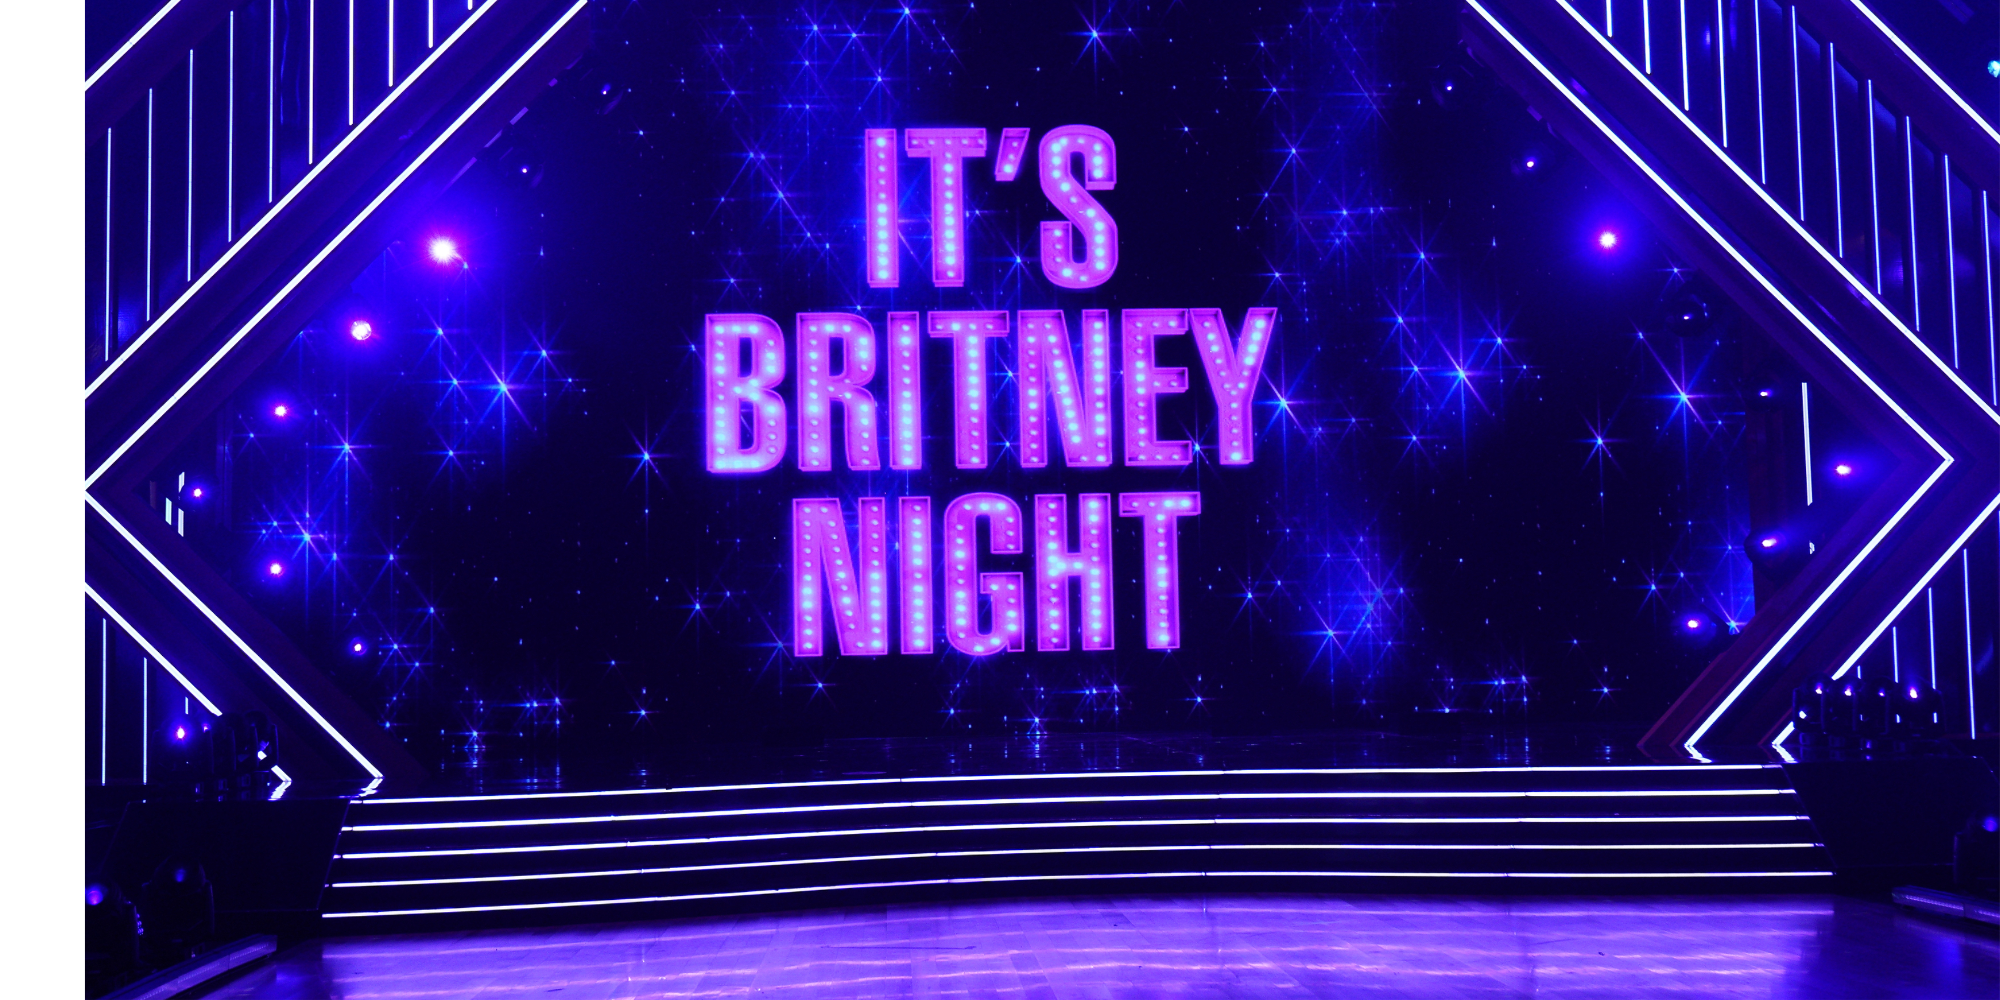 'Dancing with the Stars' fans are hoping for a Britney Spears casting twist during season 31 of the Disney+ series.